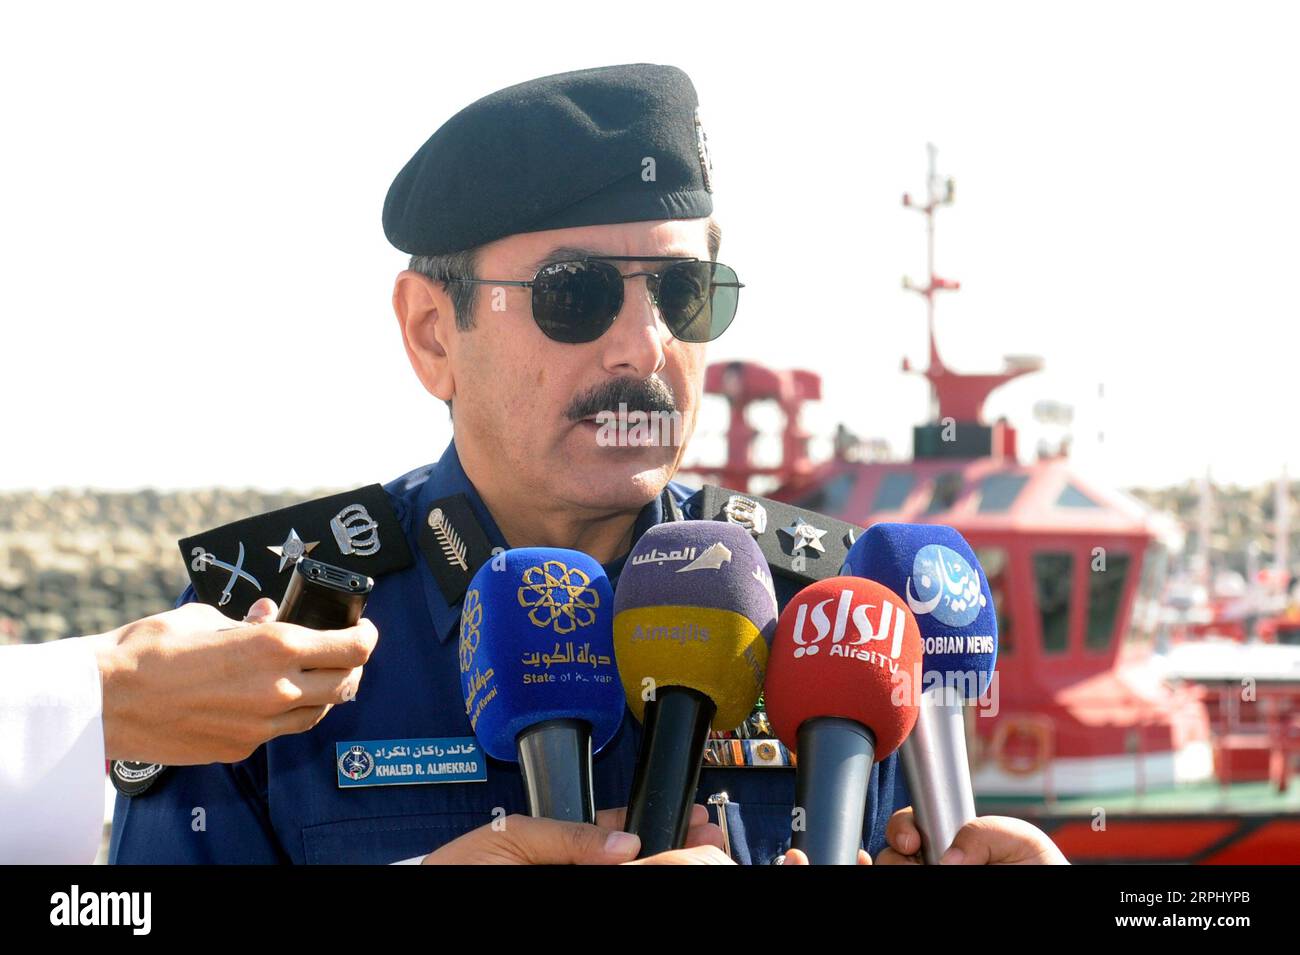 191120 -- HAWALLI GOVERNORATE, Nov. 20, 2019 Xinhua -- Director-General of Kuwait Fire Service Directorate KFSD Khaled Al-Mekrad speaks at a press conference in Hawalli Governorate, Kuwait, on Nov. 20, 2019. Kuwait Fire Service Directorate KFSD launched on Wednesday a new batch of naval boats with the latest navigational equipment to facilitate search and rescue operations, KFSD Director-General Khaled Al-Mekrad said. Xinhua KUWAIT-HAWALLI GOVERNORATE-NEW RESCUE BOATS PUBLICATIONxNOTxINxCHN Stock Photo